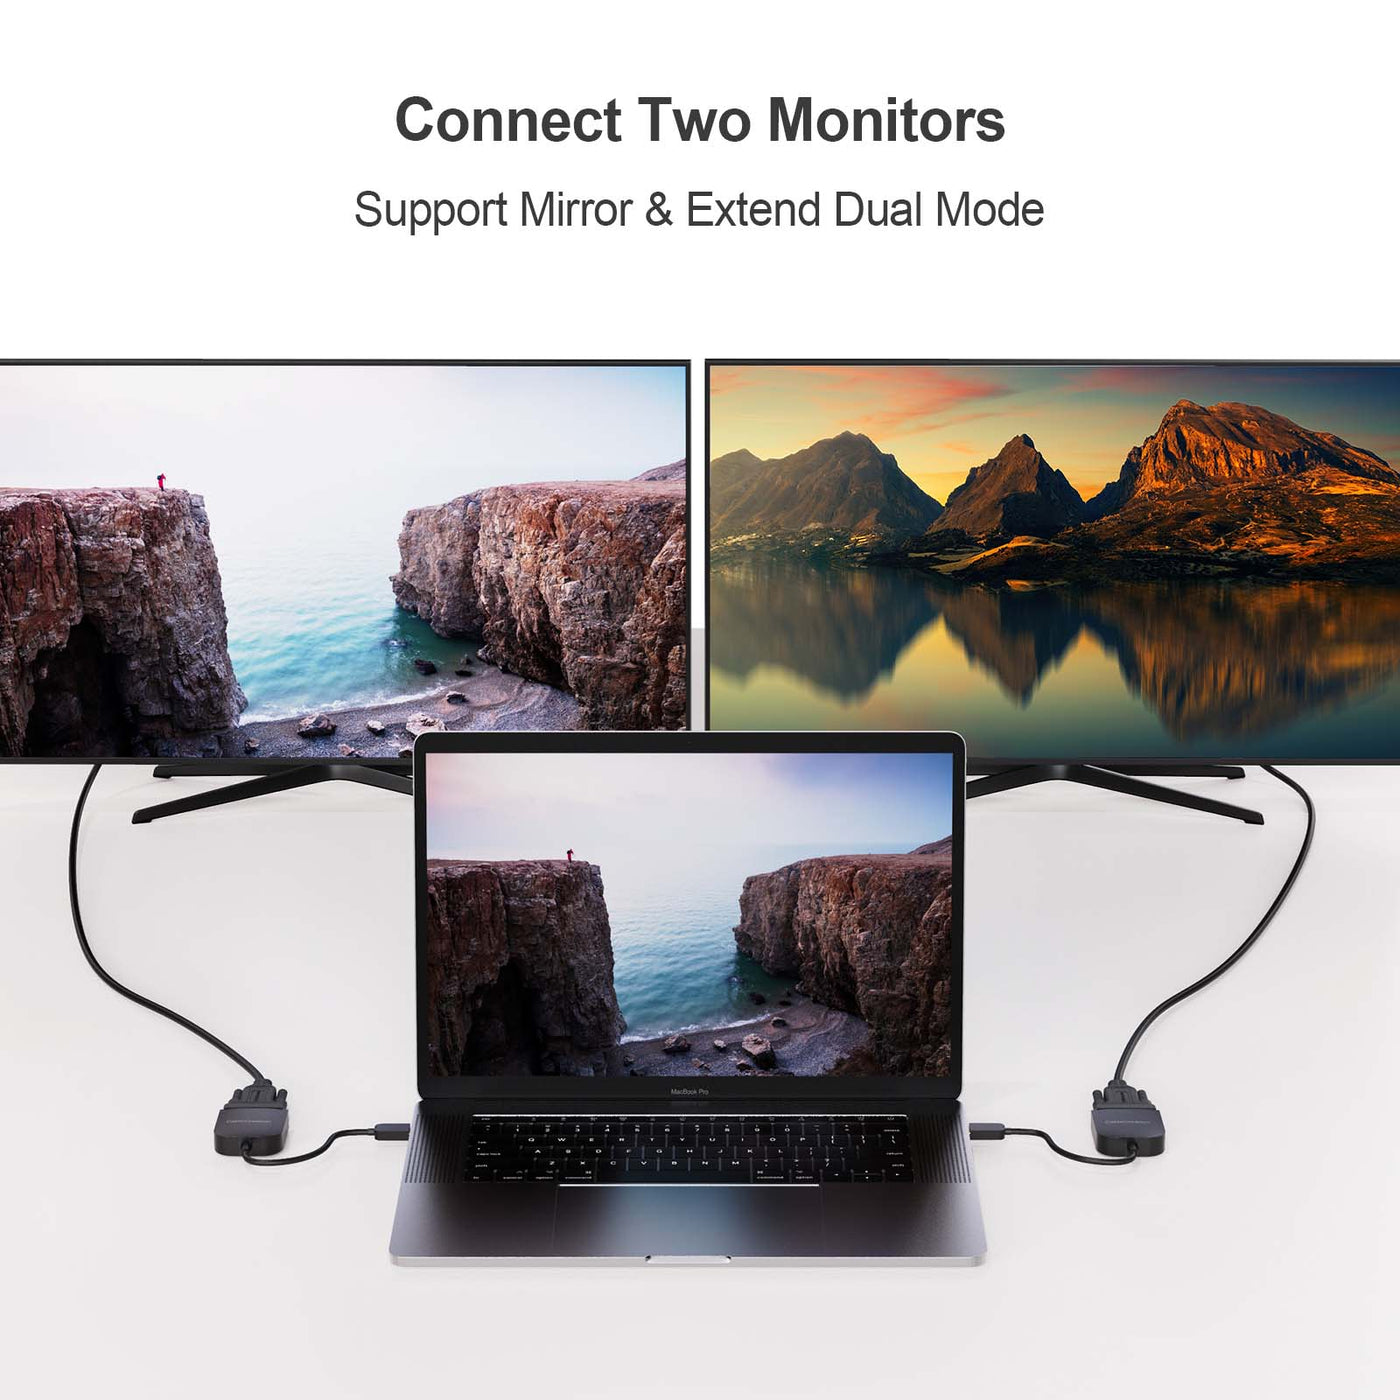 How to connect laptop to monitor